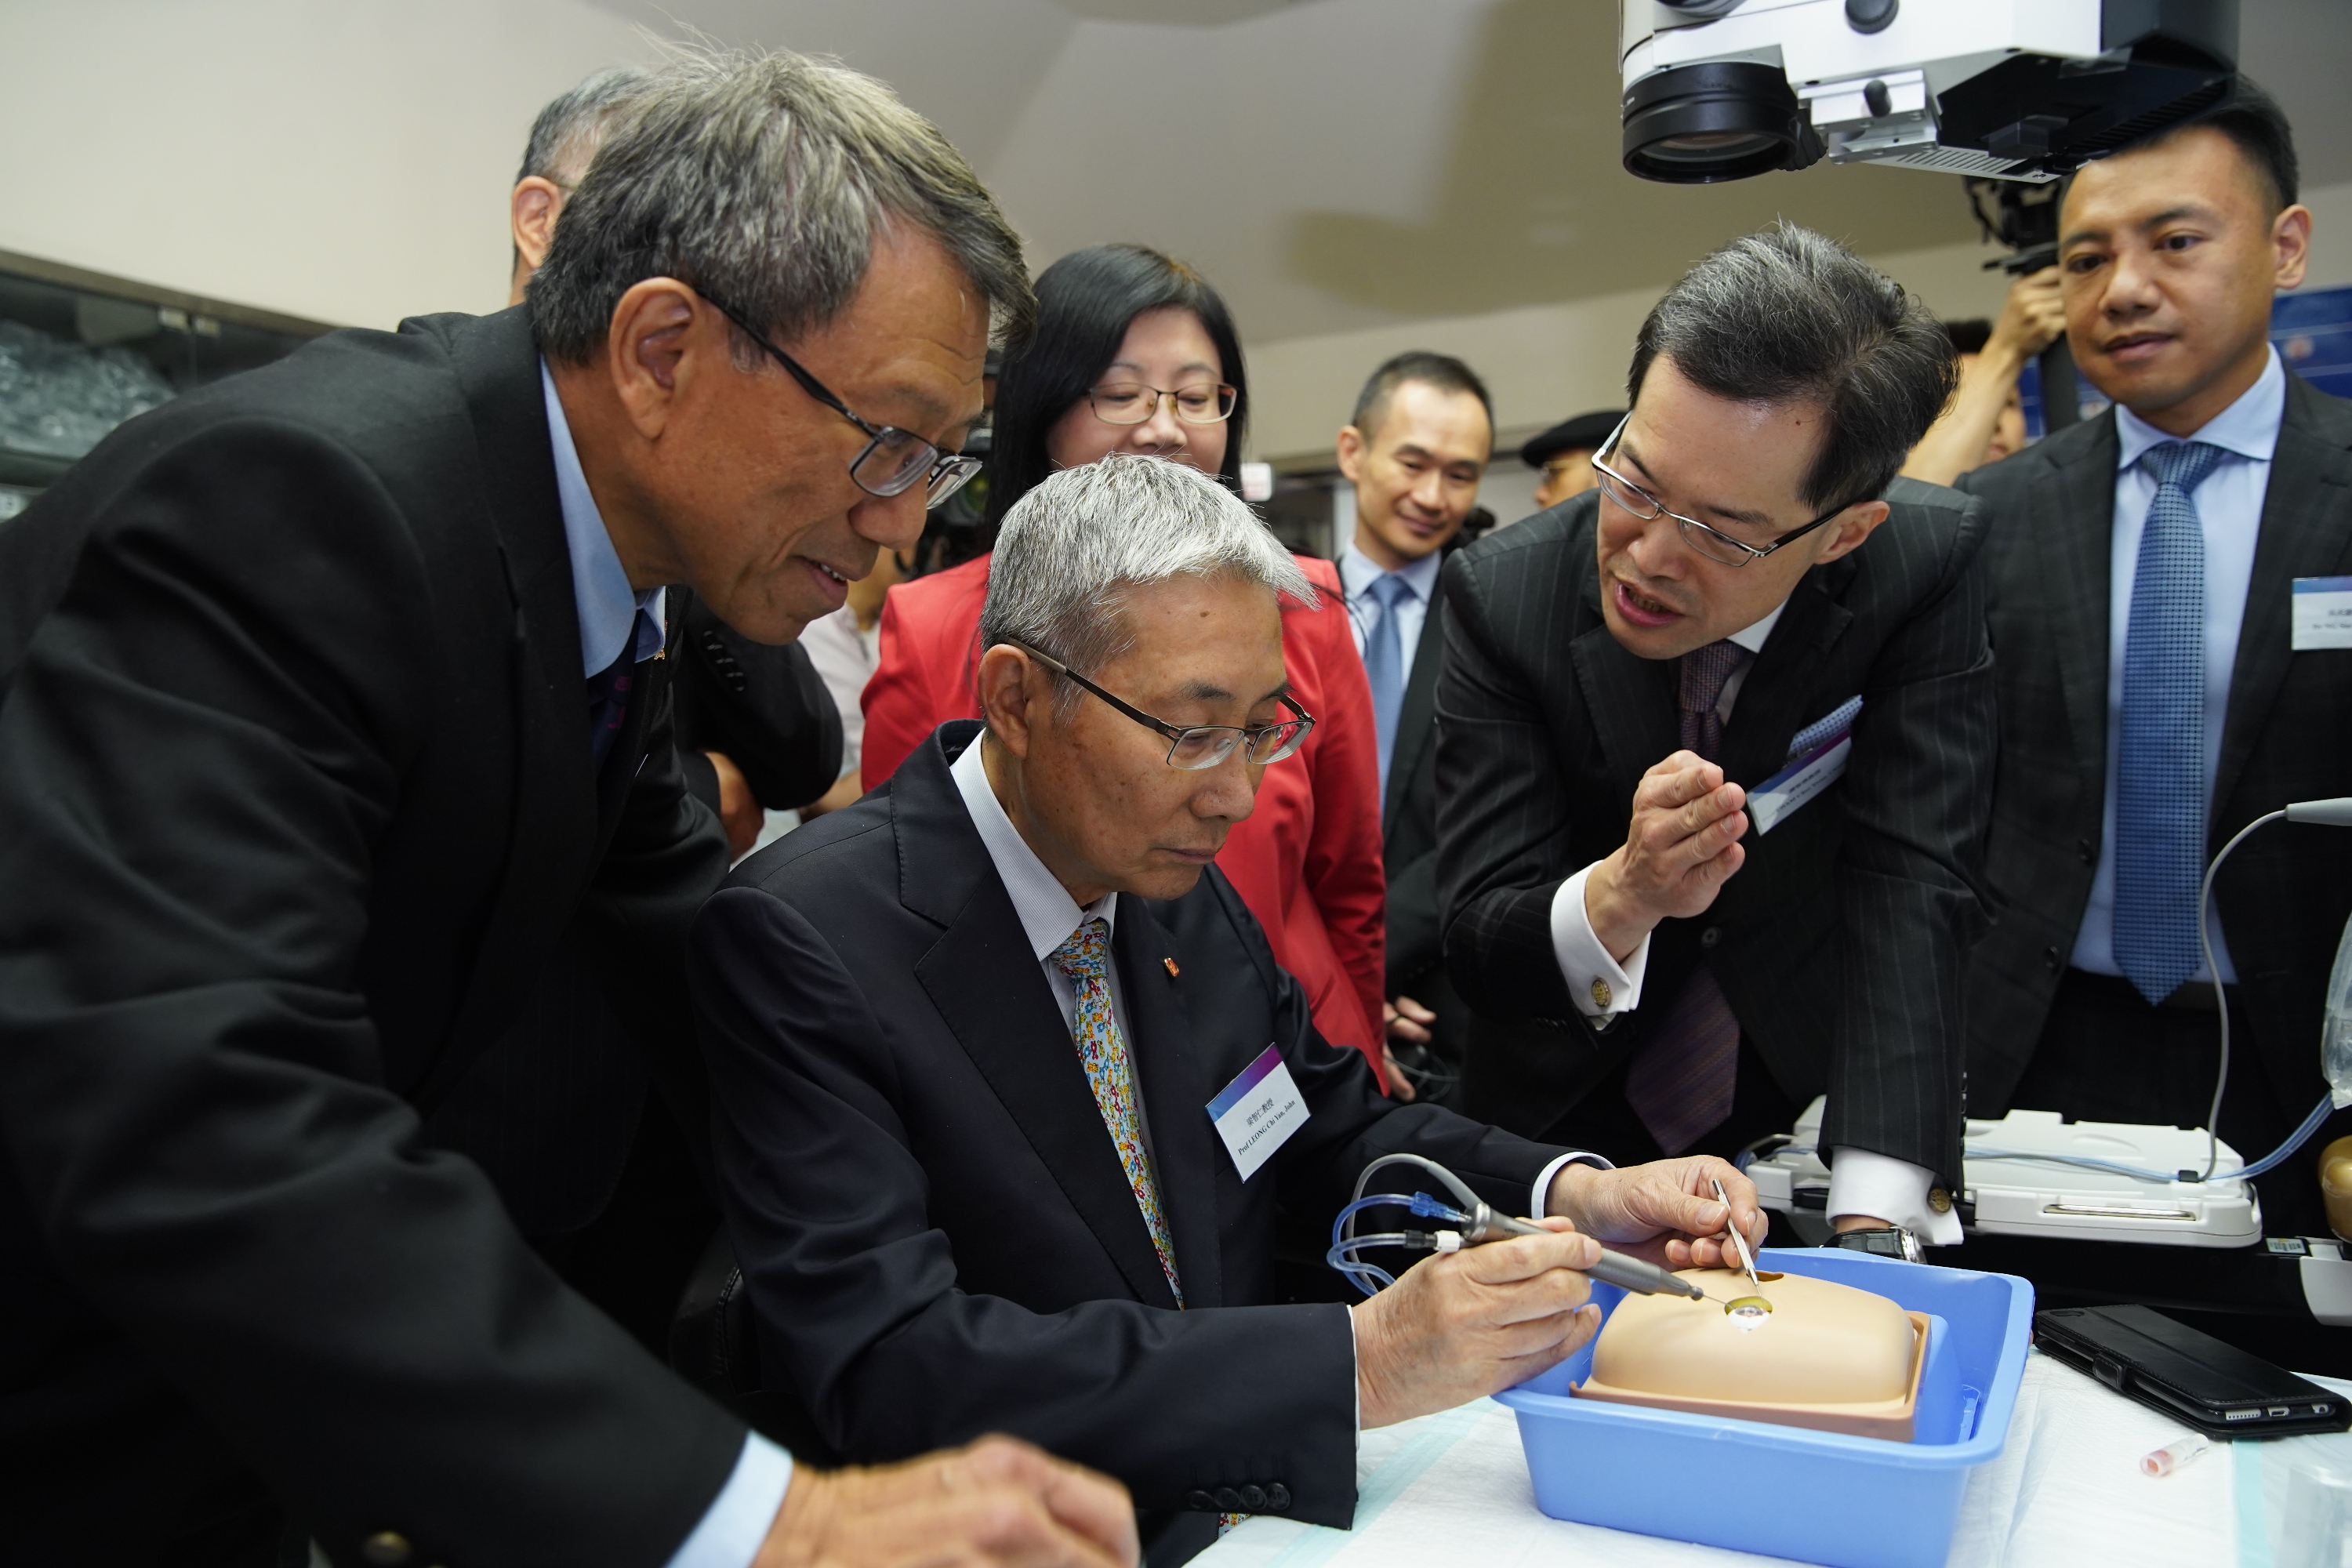 Guests visit the ophthalmic microsurgical training equipment at the CUHK Eye Centre. Every year more than 100 eye doctors and eye care professionals will be able to enhance their surgical and procedural skills through the “CUHK Jockey Club Ophthalmic Microsurgical Training Programme”.